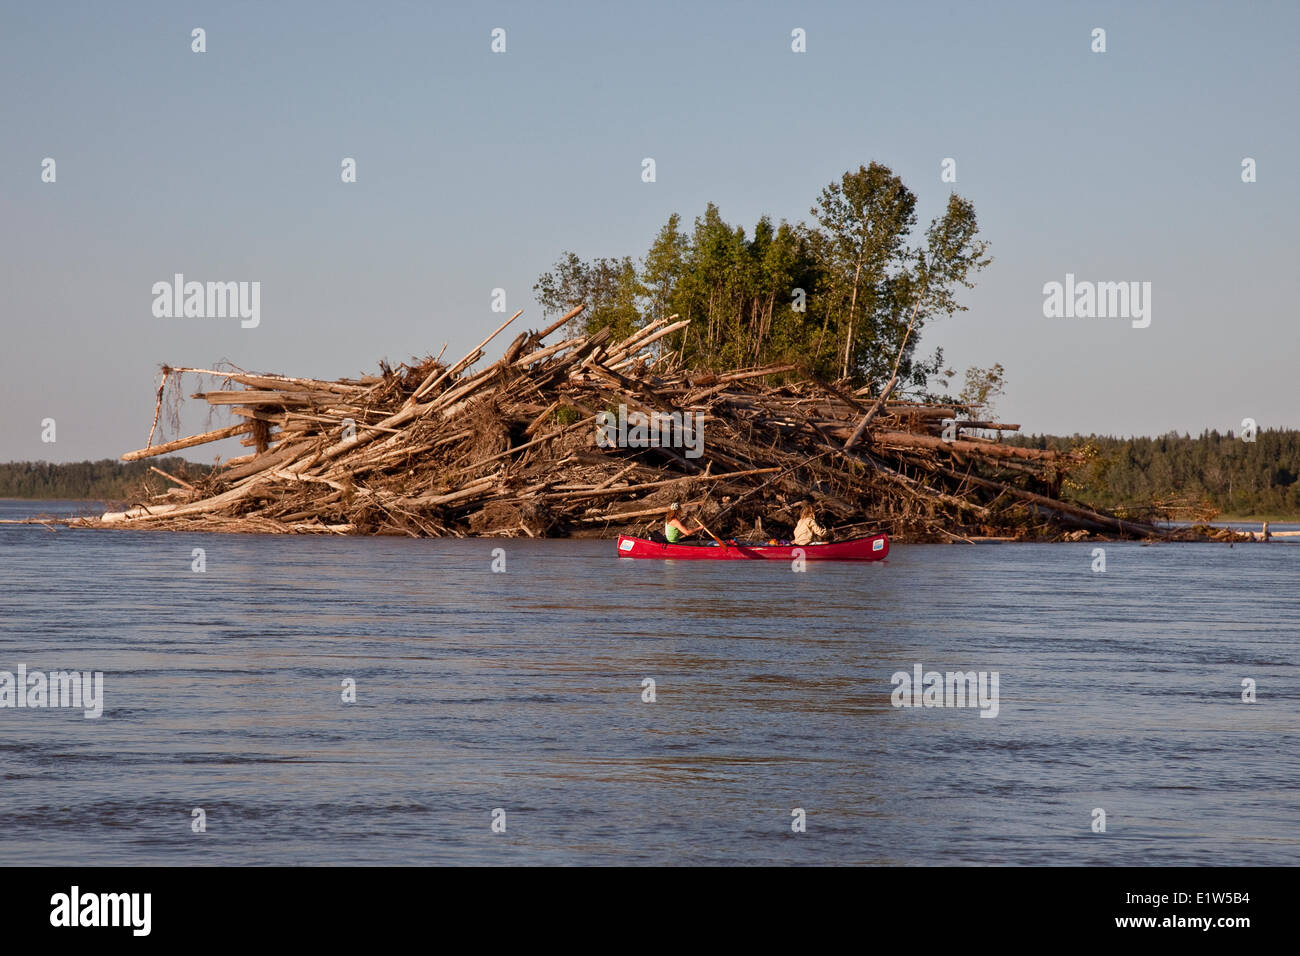 Two women paddle past debris pile from previous flood on Nahanni River, Nahanni National Park Preserve, NWT, Canada. Stock Photo